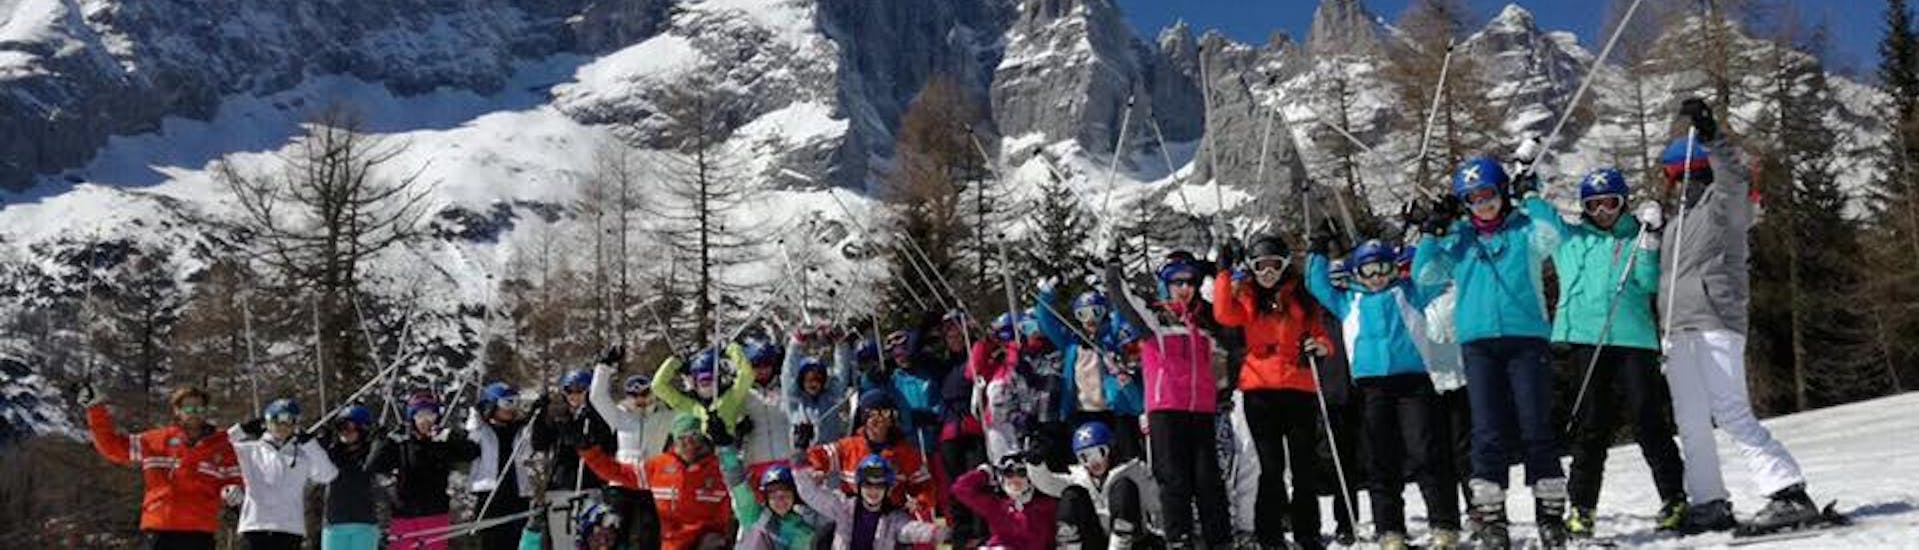 The Kids Ski Lessons (from 9 y.) - Full Day - Advanced are over and the participants in the final race are on the podium, the ski school teacher of the Scuola Italiana di Sci Civetta celebrates with them.